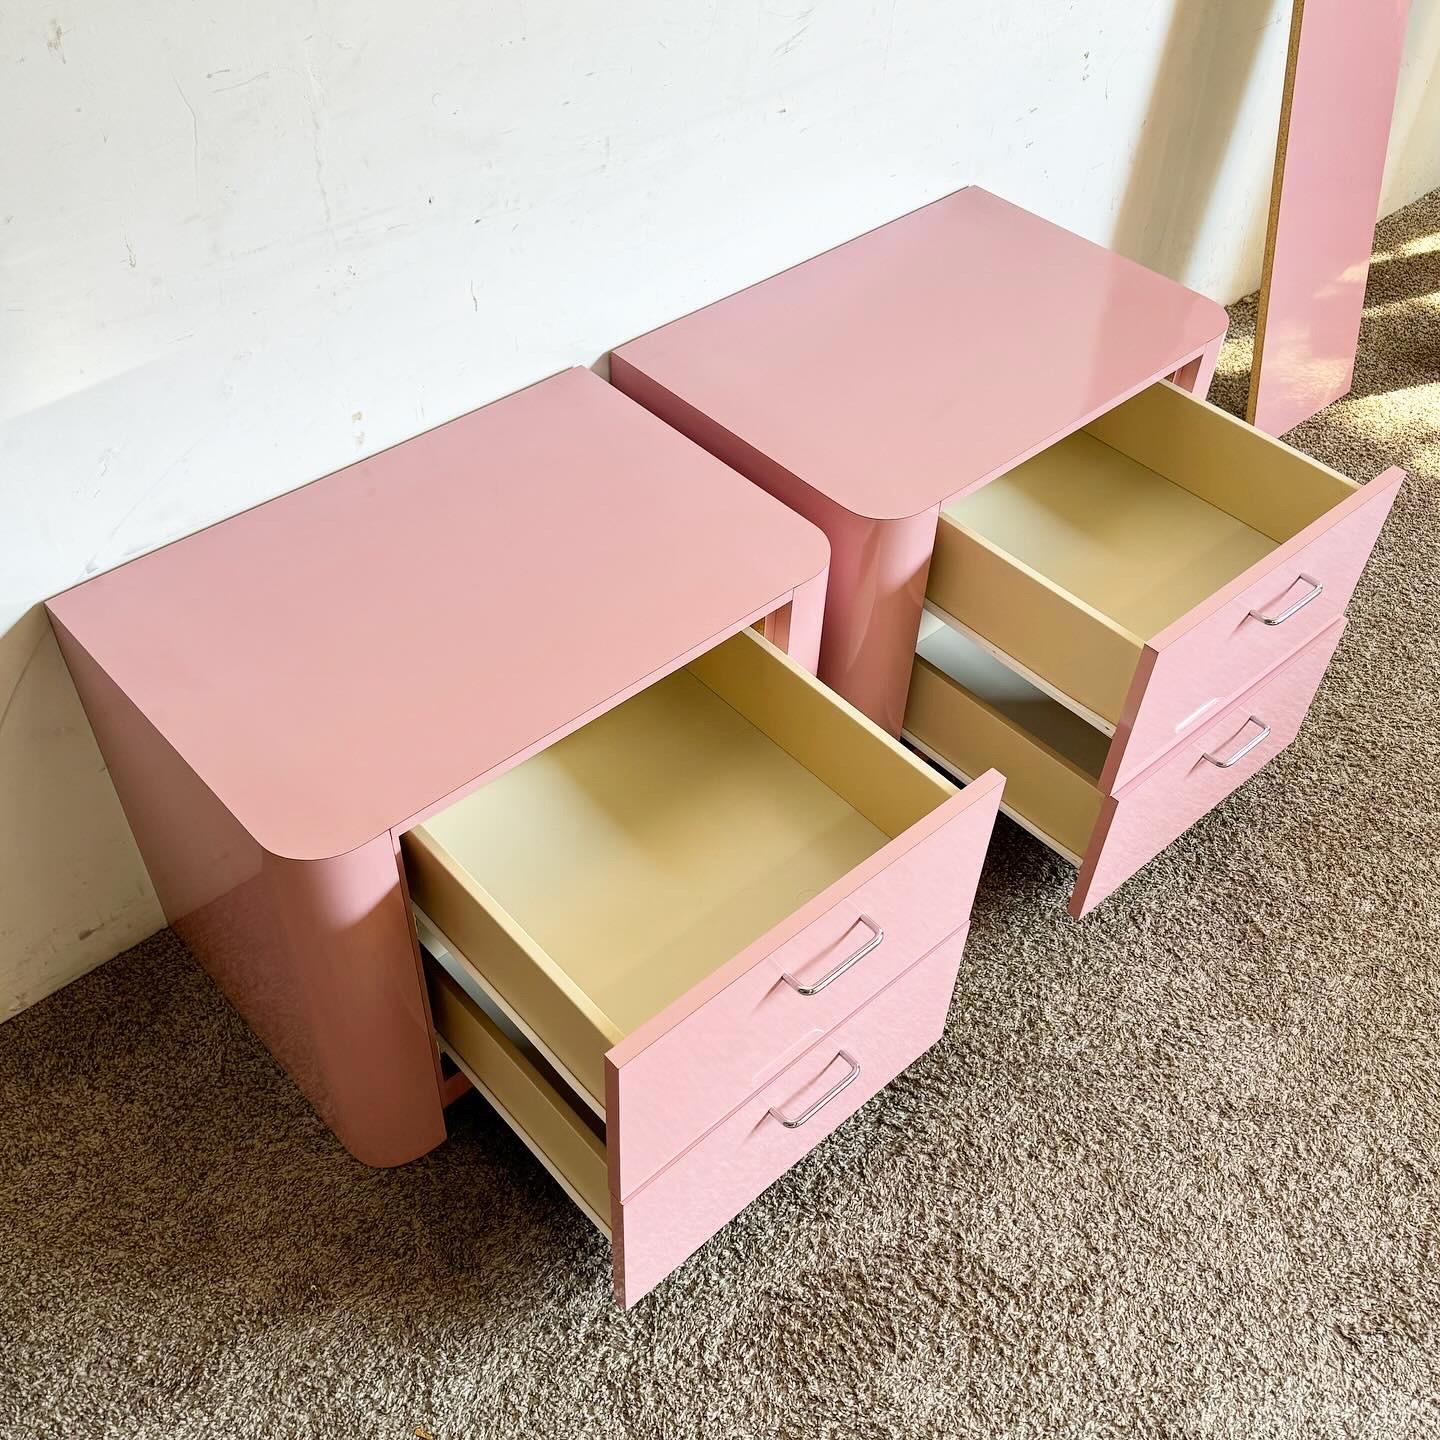 Post-Modern Postmodern Pink Lacquer Laminate Nightstands With Chrome Handles - a Pair For Sale